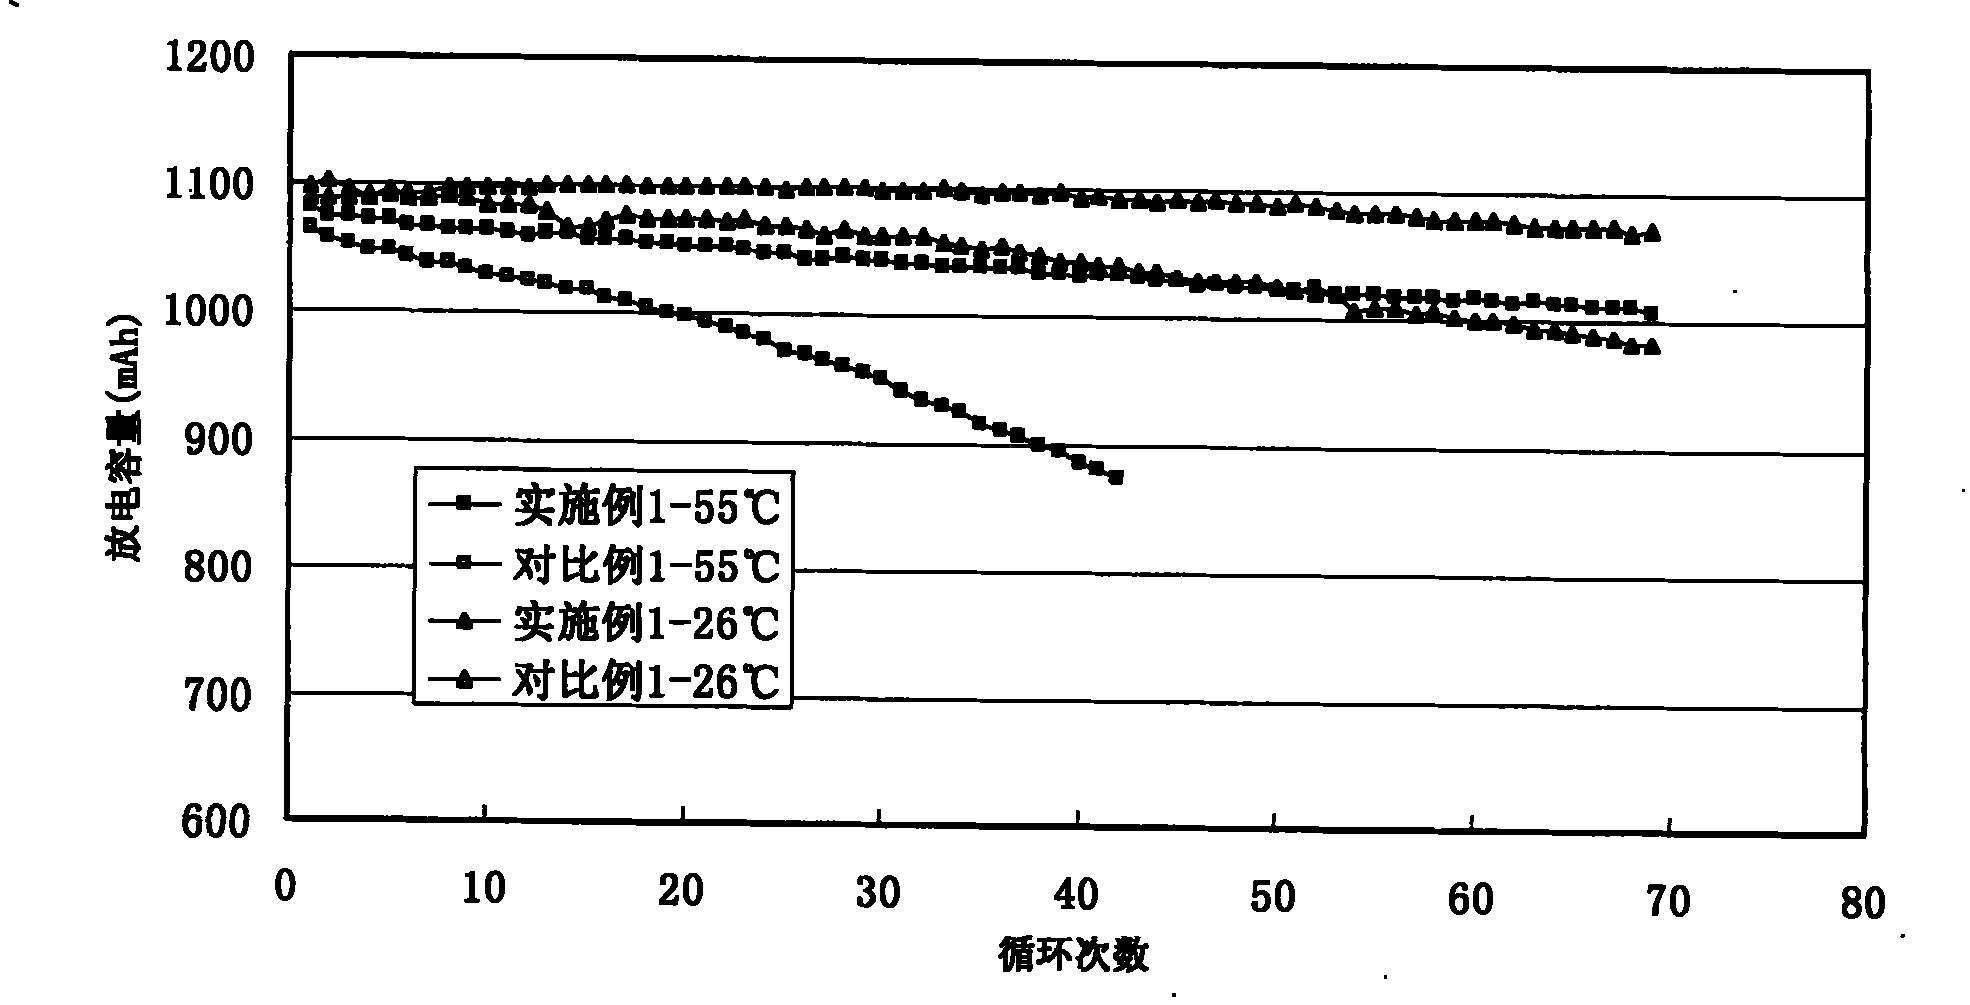 Complex Li-Mn-oxide, manufacture method and battery made of this material